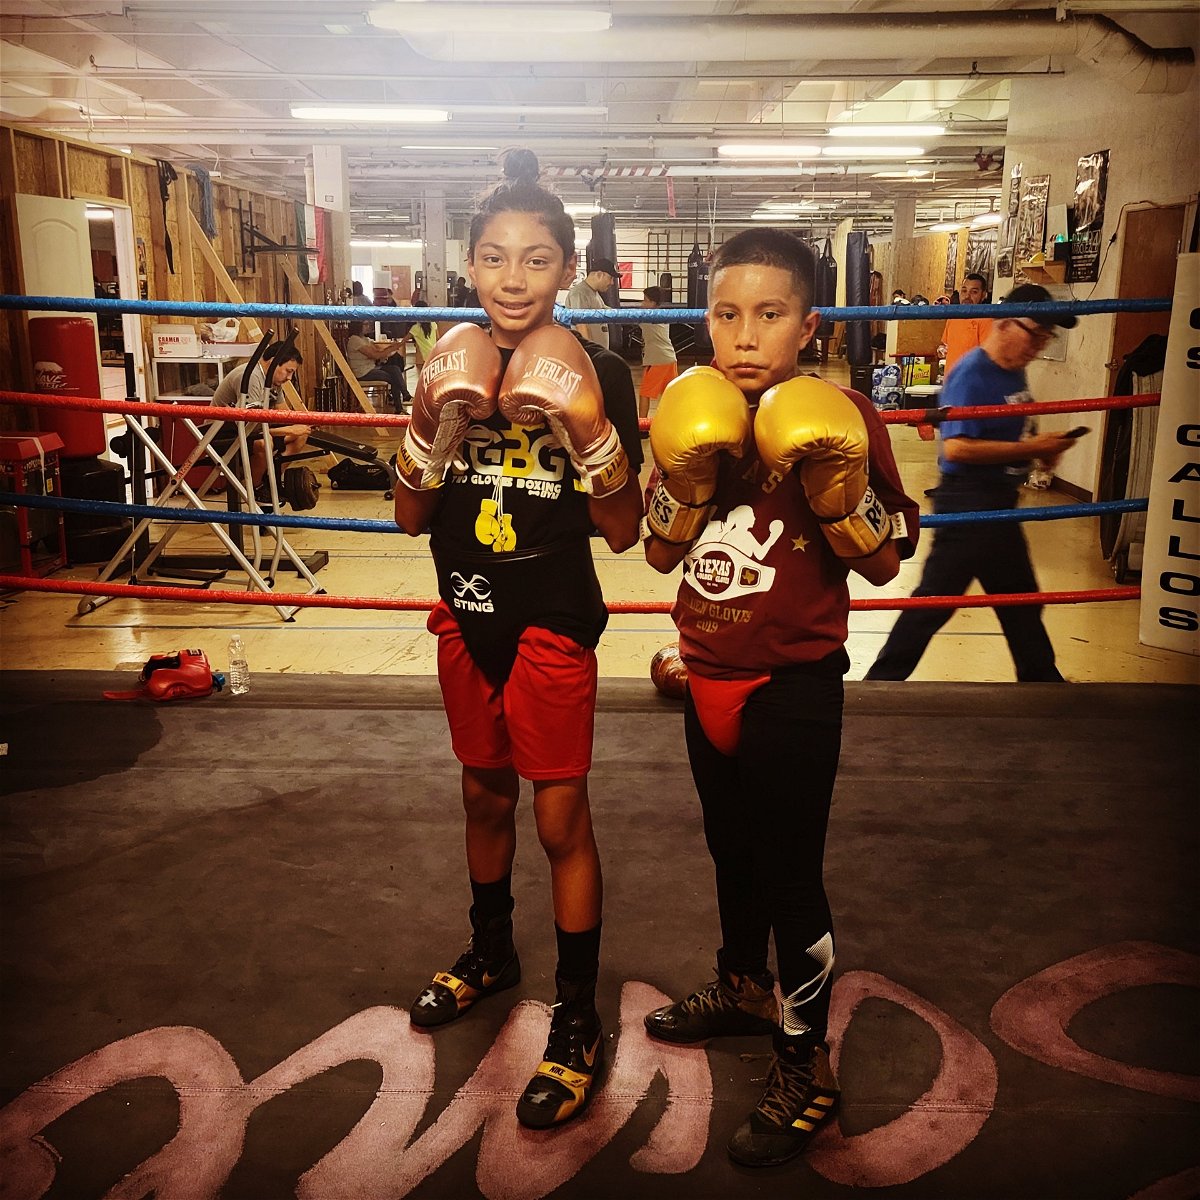 Los Gallos: A gym from West Dallas where boxing teaches life lessons